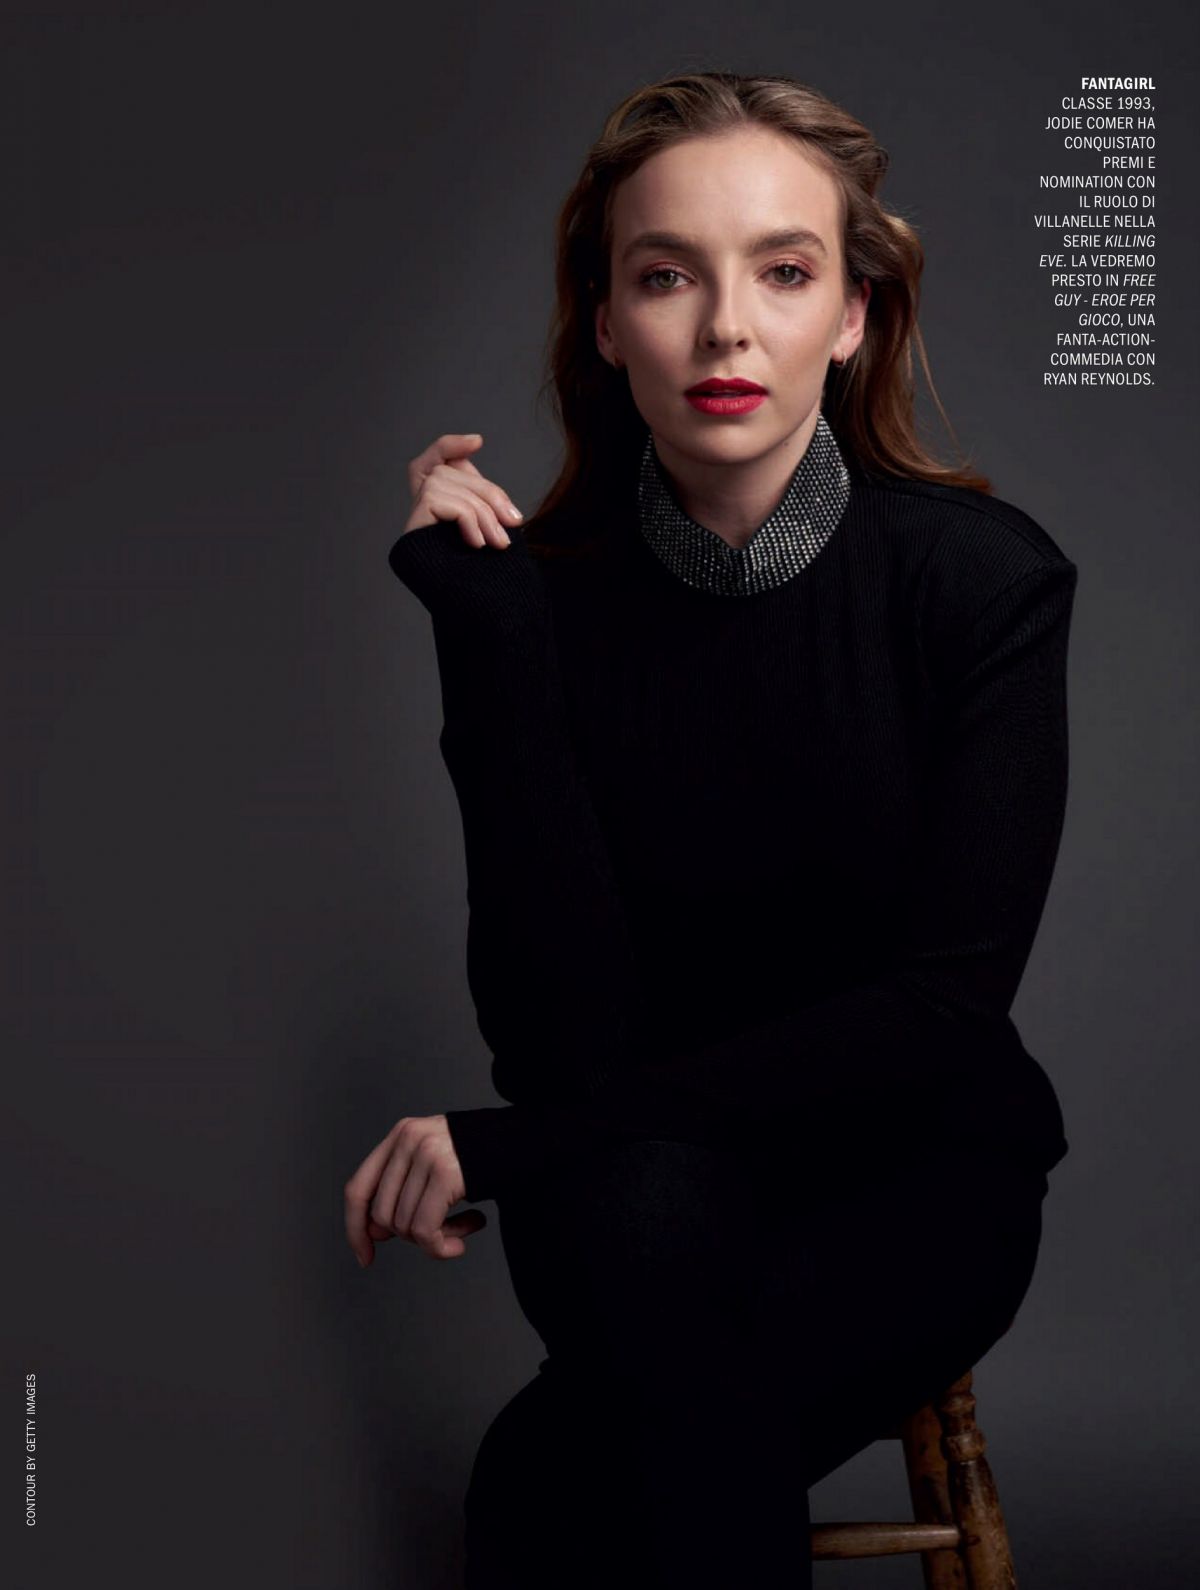 Jodie Comer in Marie Claire Magazine, Italy December 2020